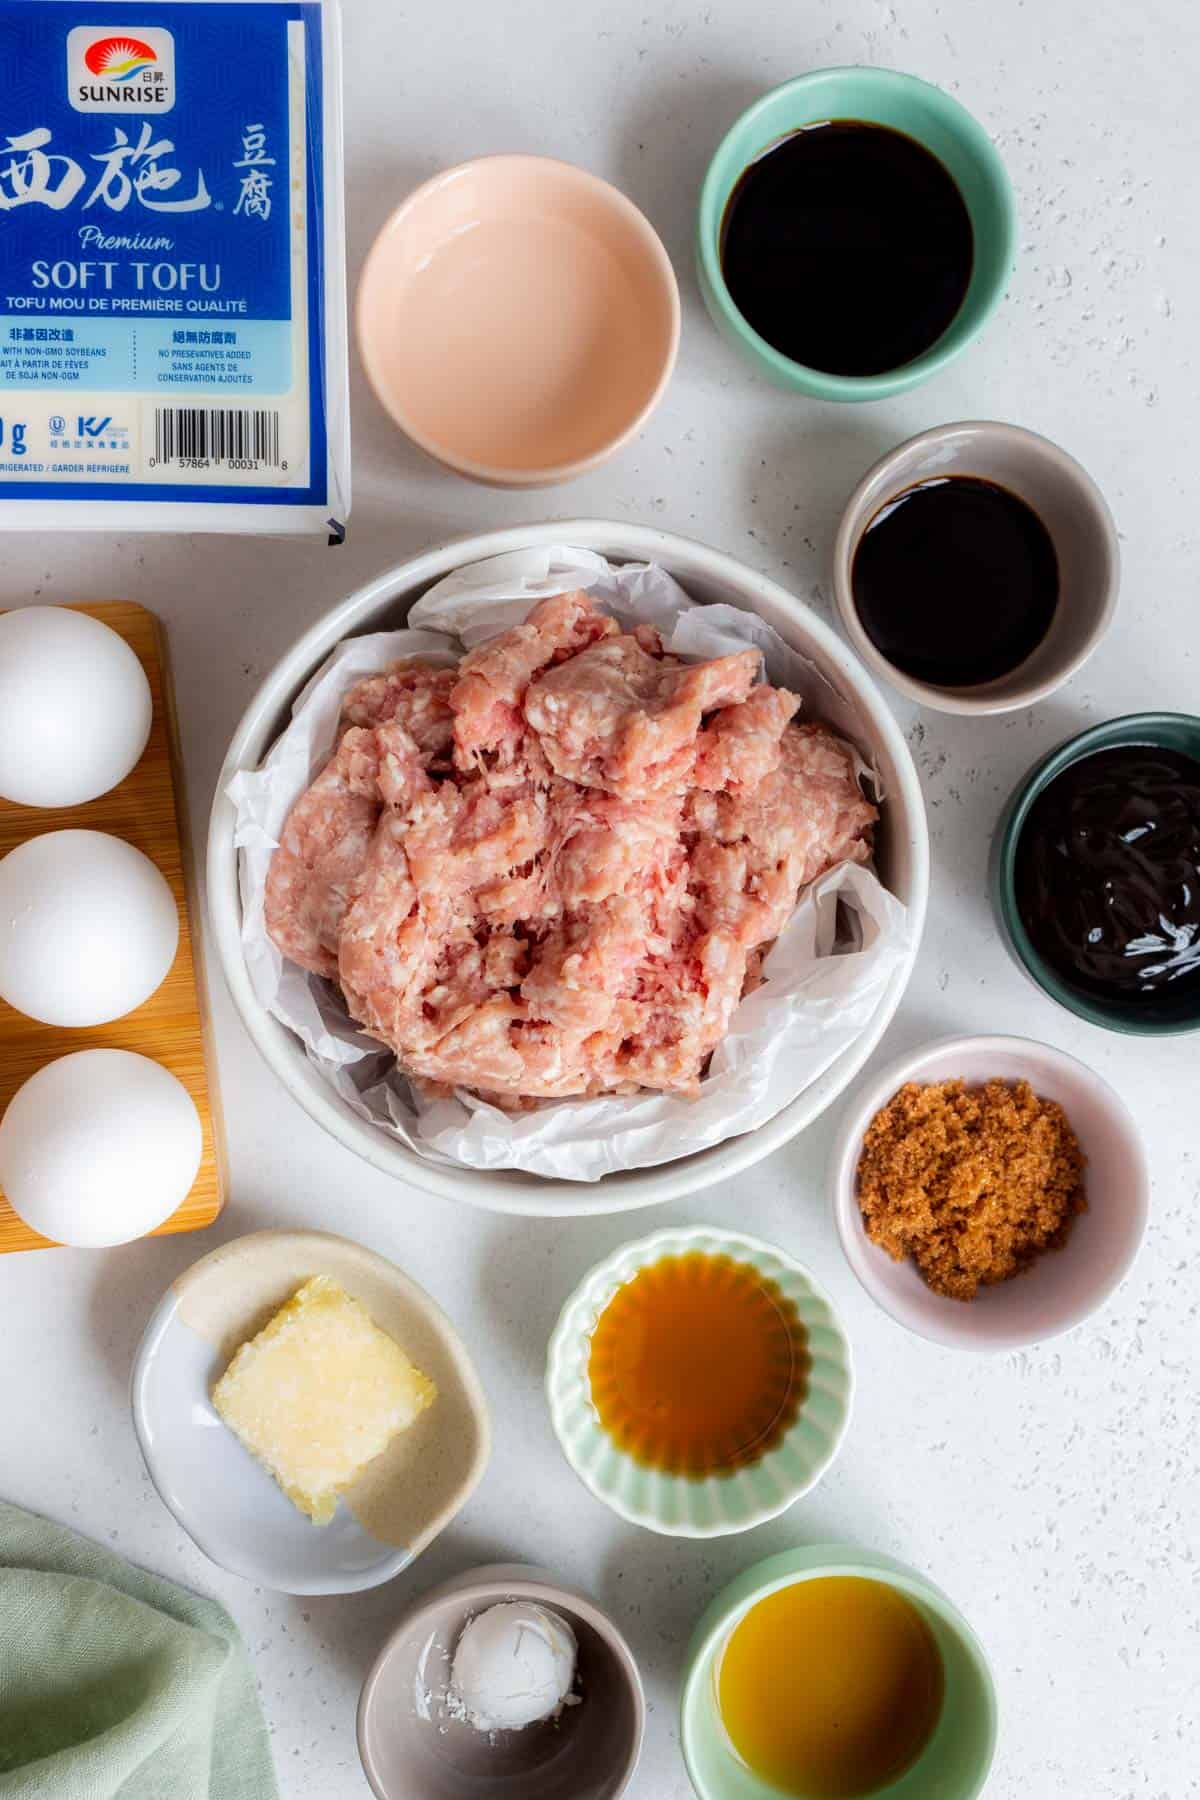 Ingredients needed to make steamed egg and tofu with minced pork.